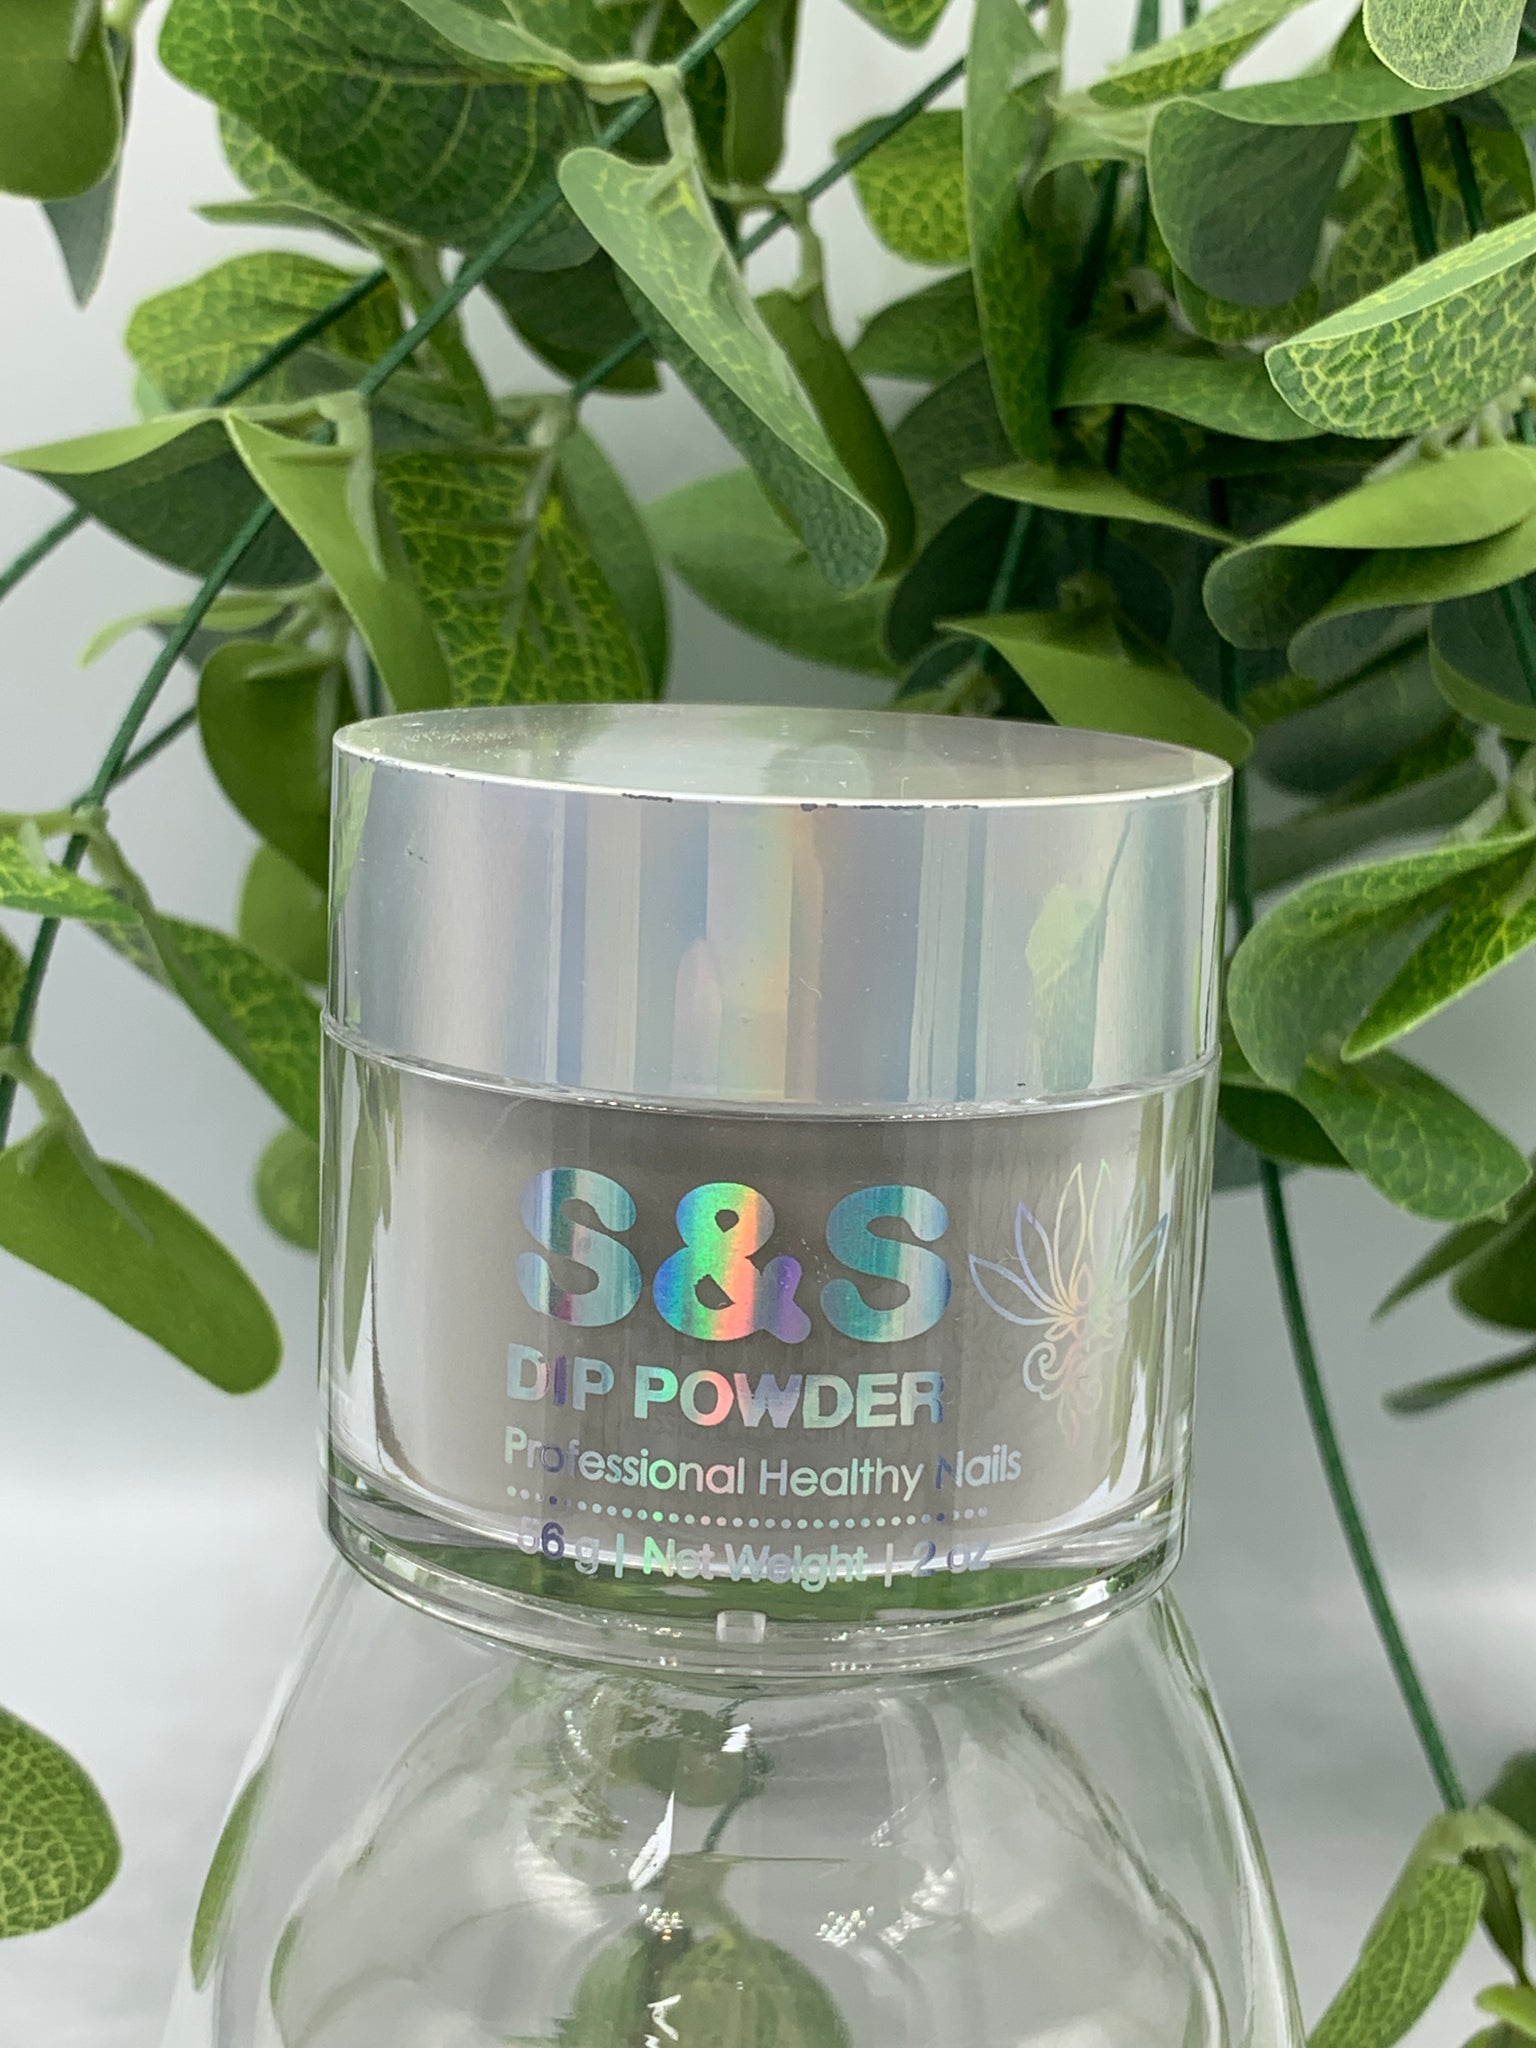 S&S DIPPING POWDER # 579